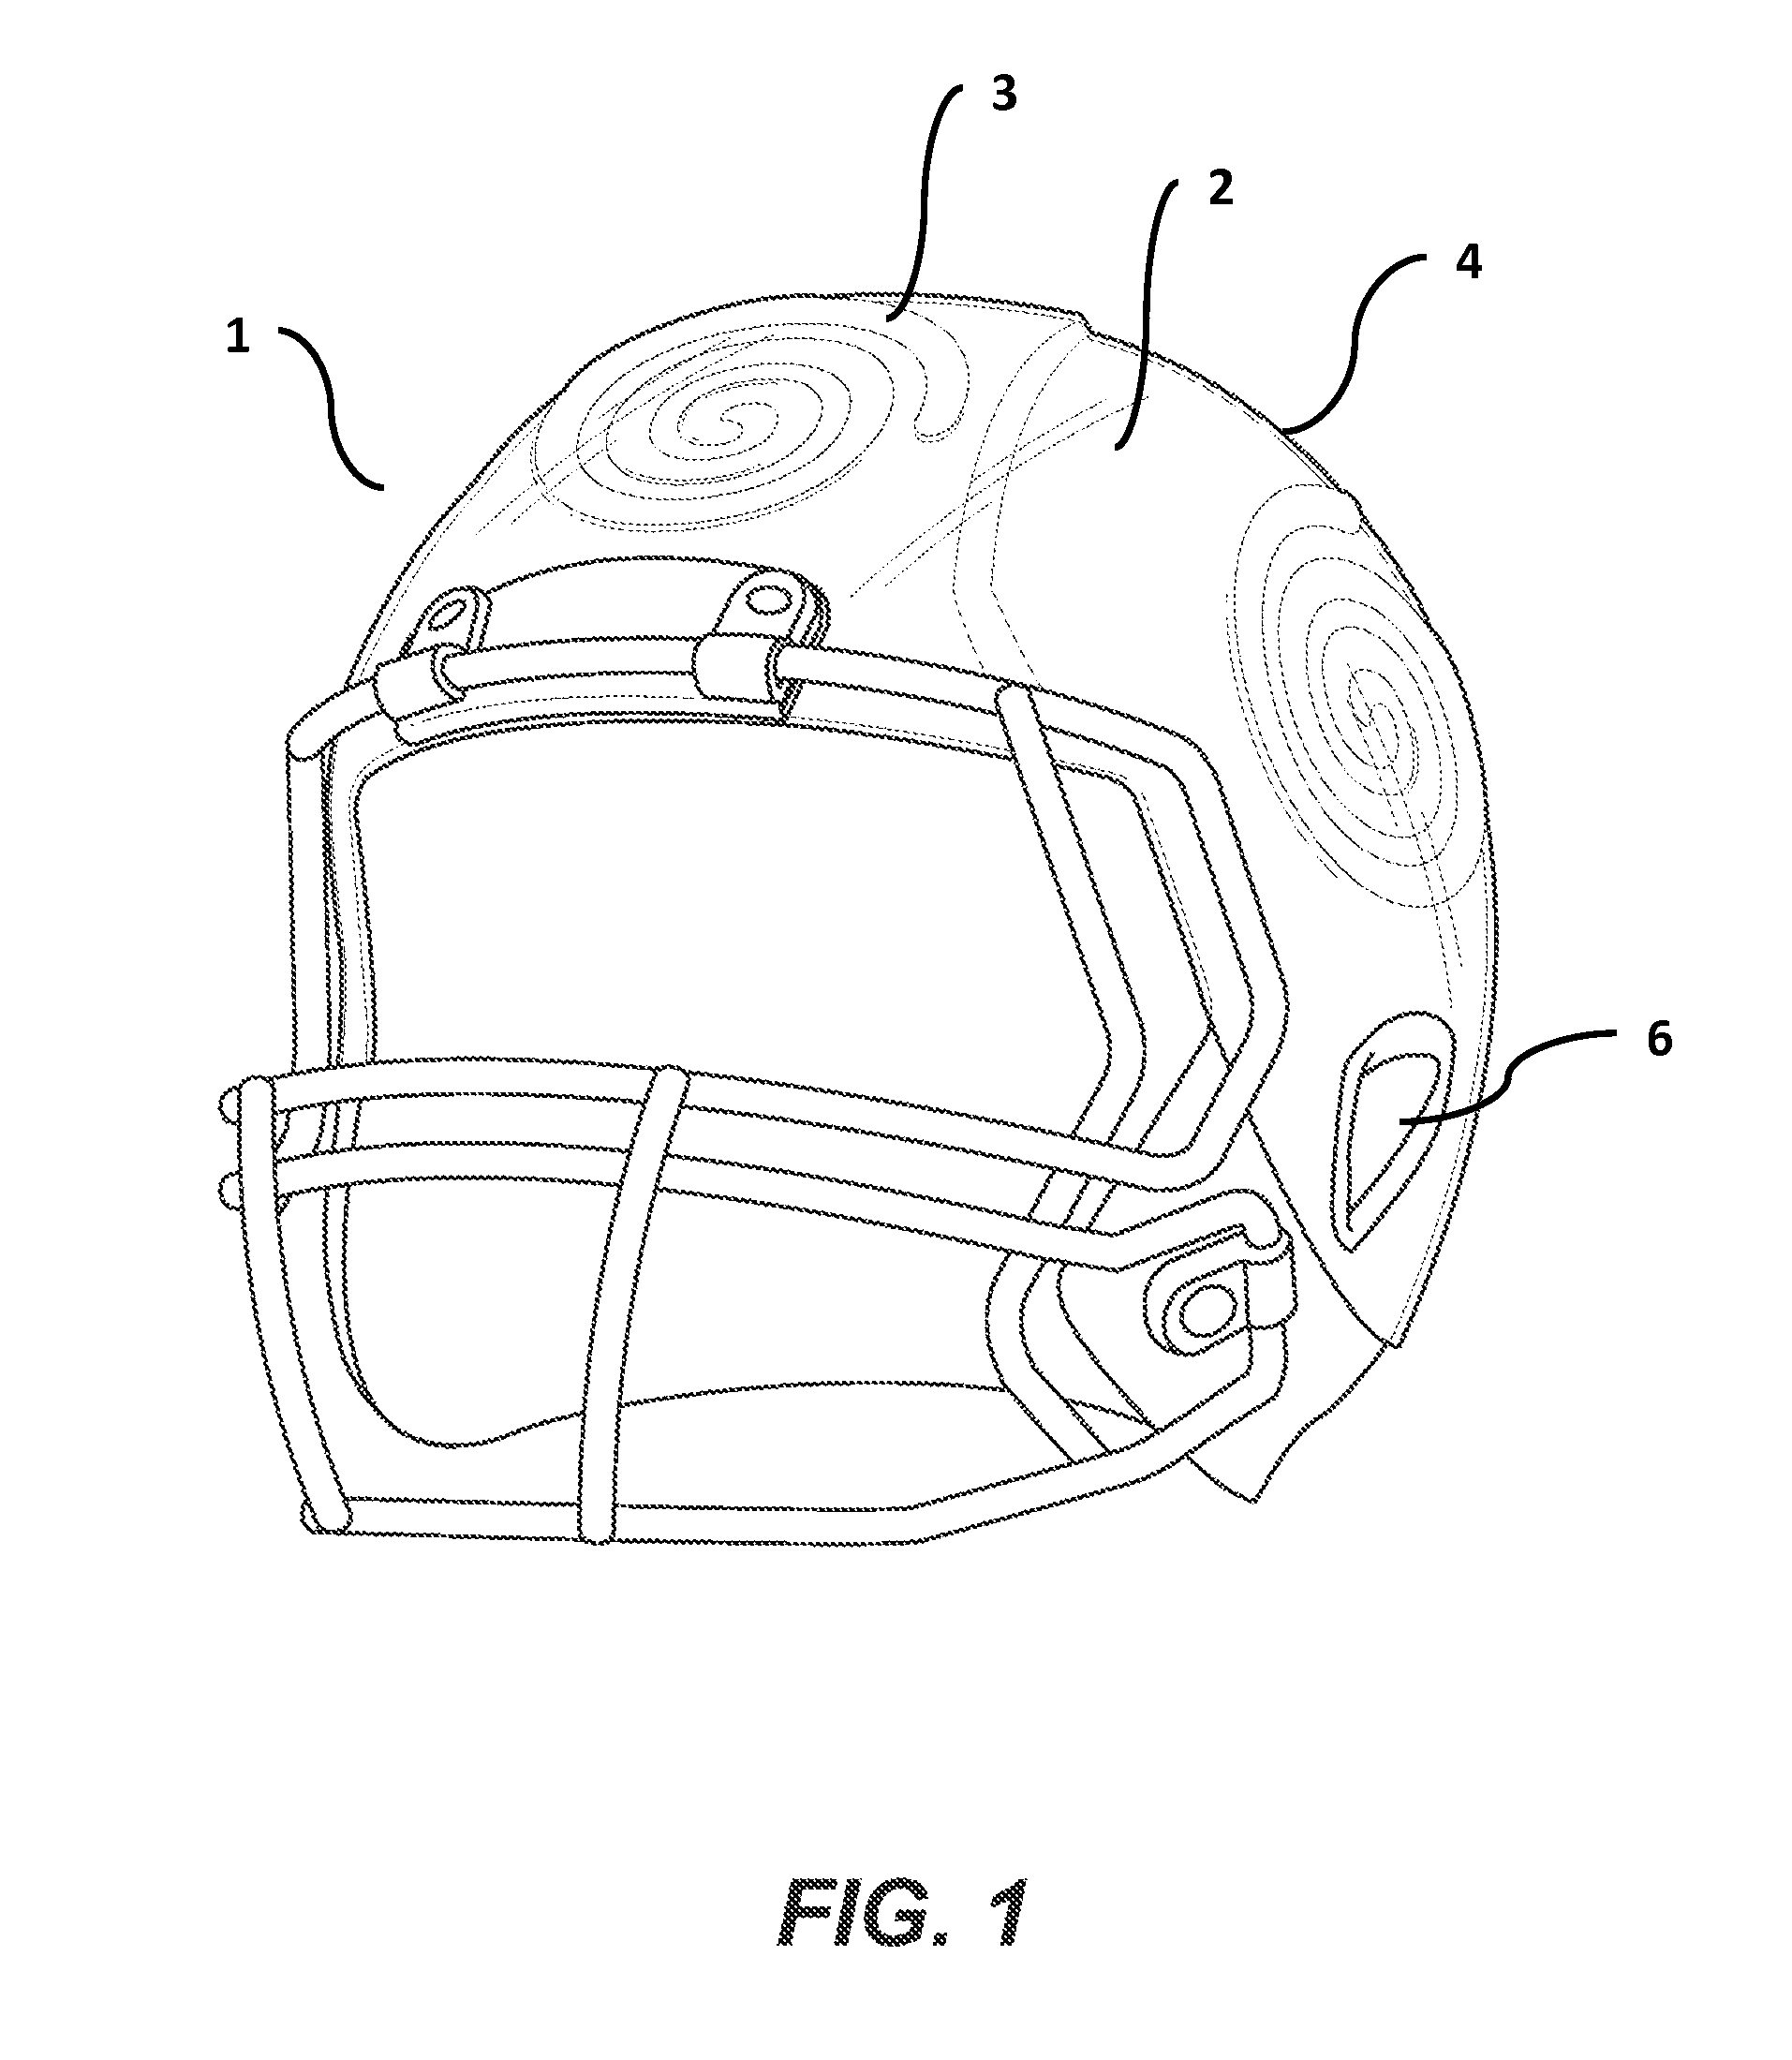 Helmet for reducing concussive forces during collision